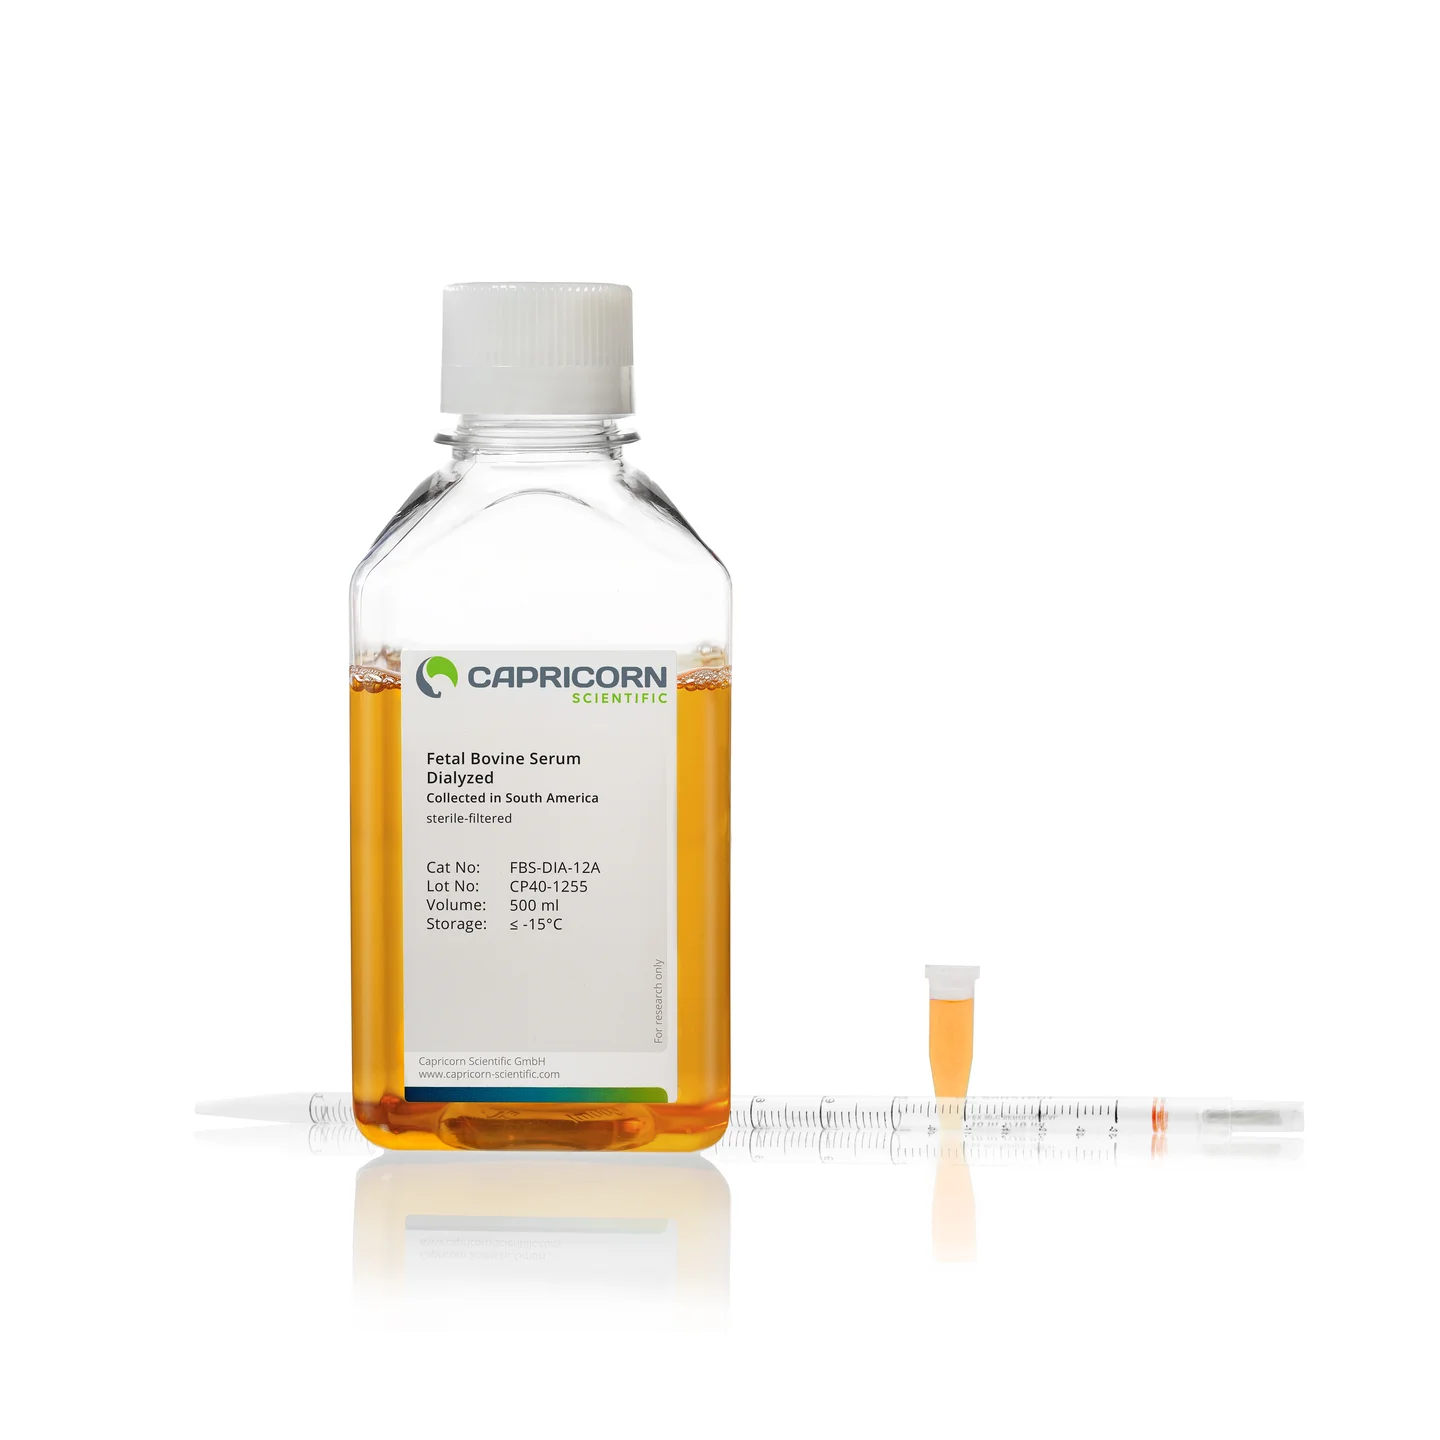 Fetal Bovine Serum (FBS), Dialyzed, Collected in South America